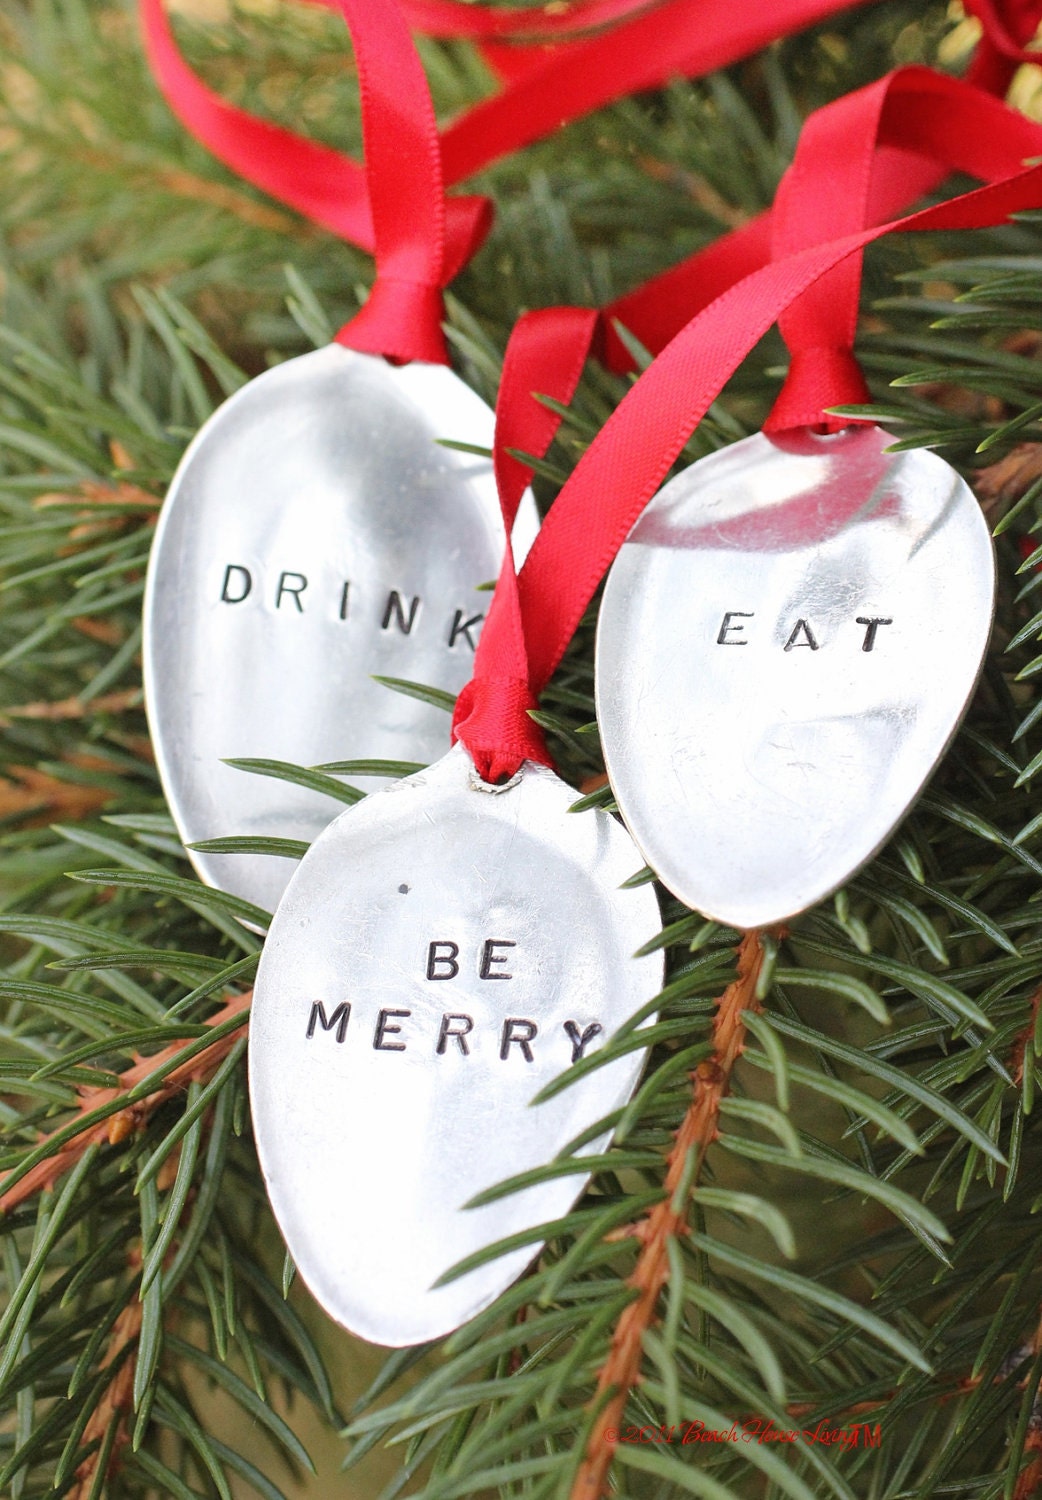 Christmas Ornaments Eat Drink Be Merry Hand Stamped  Wine Tags Holiday Decorations Recycled Vintage Silverware